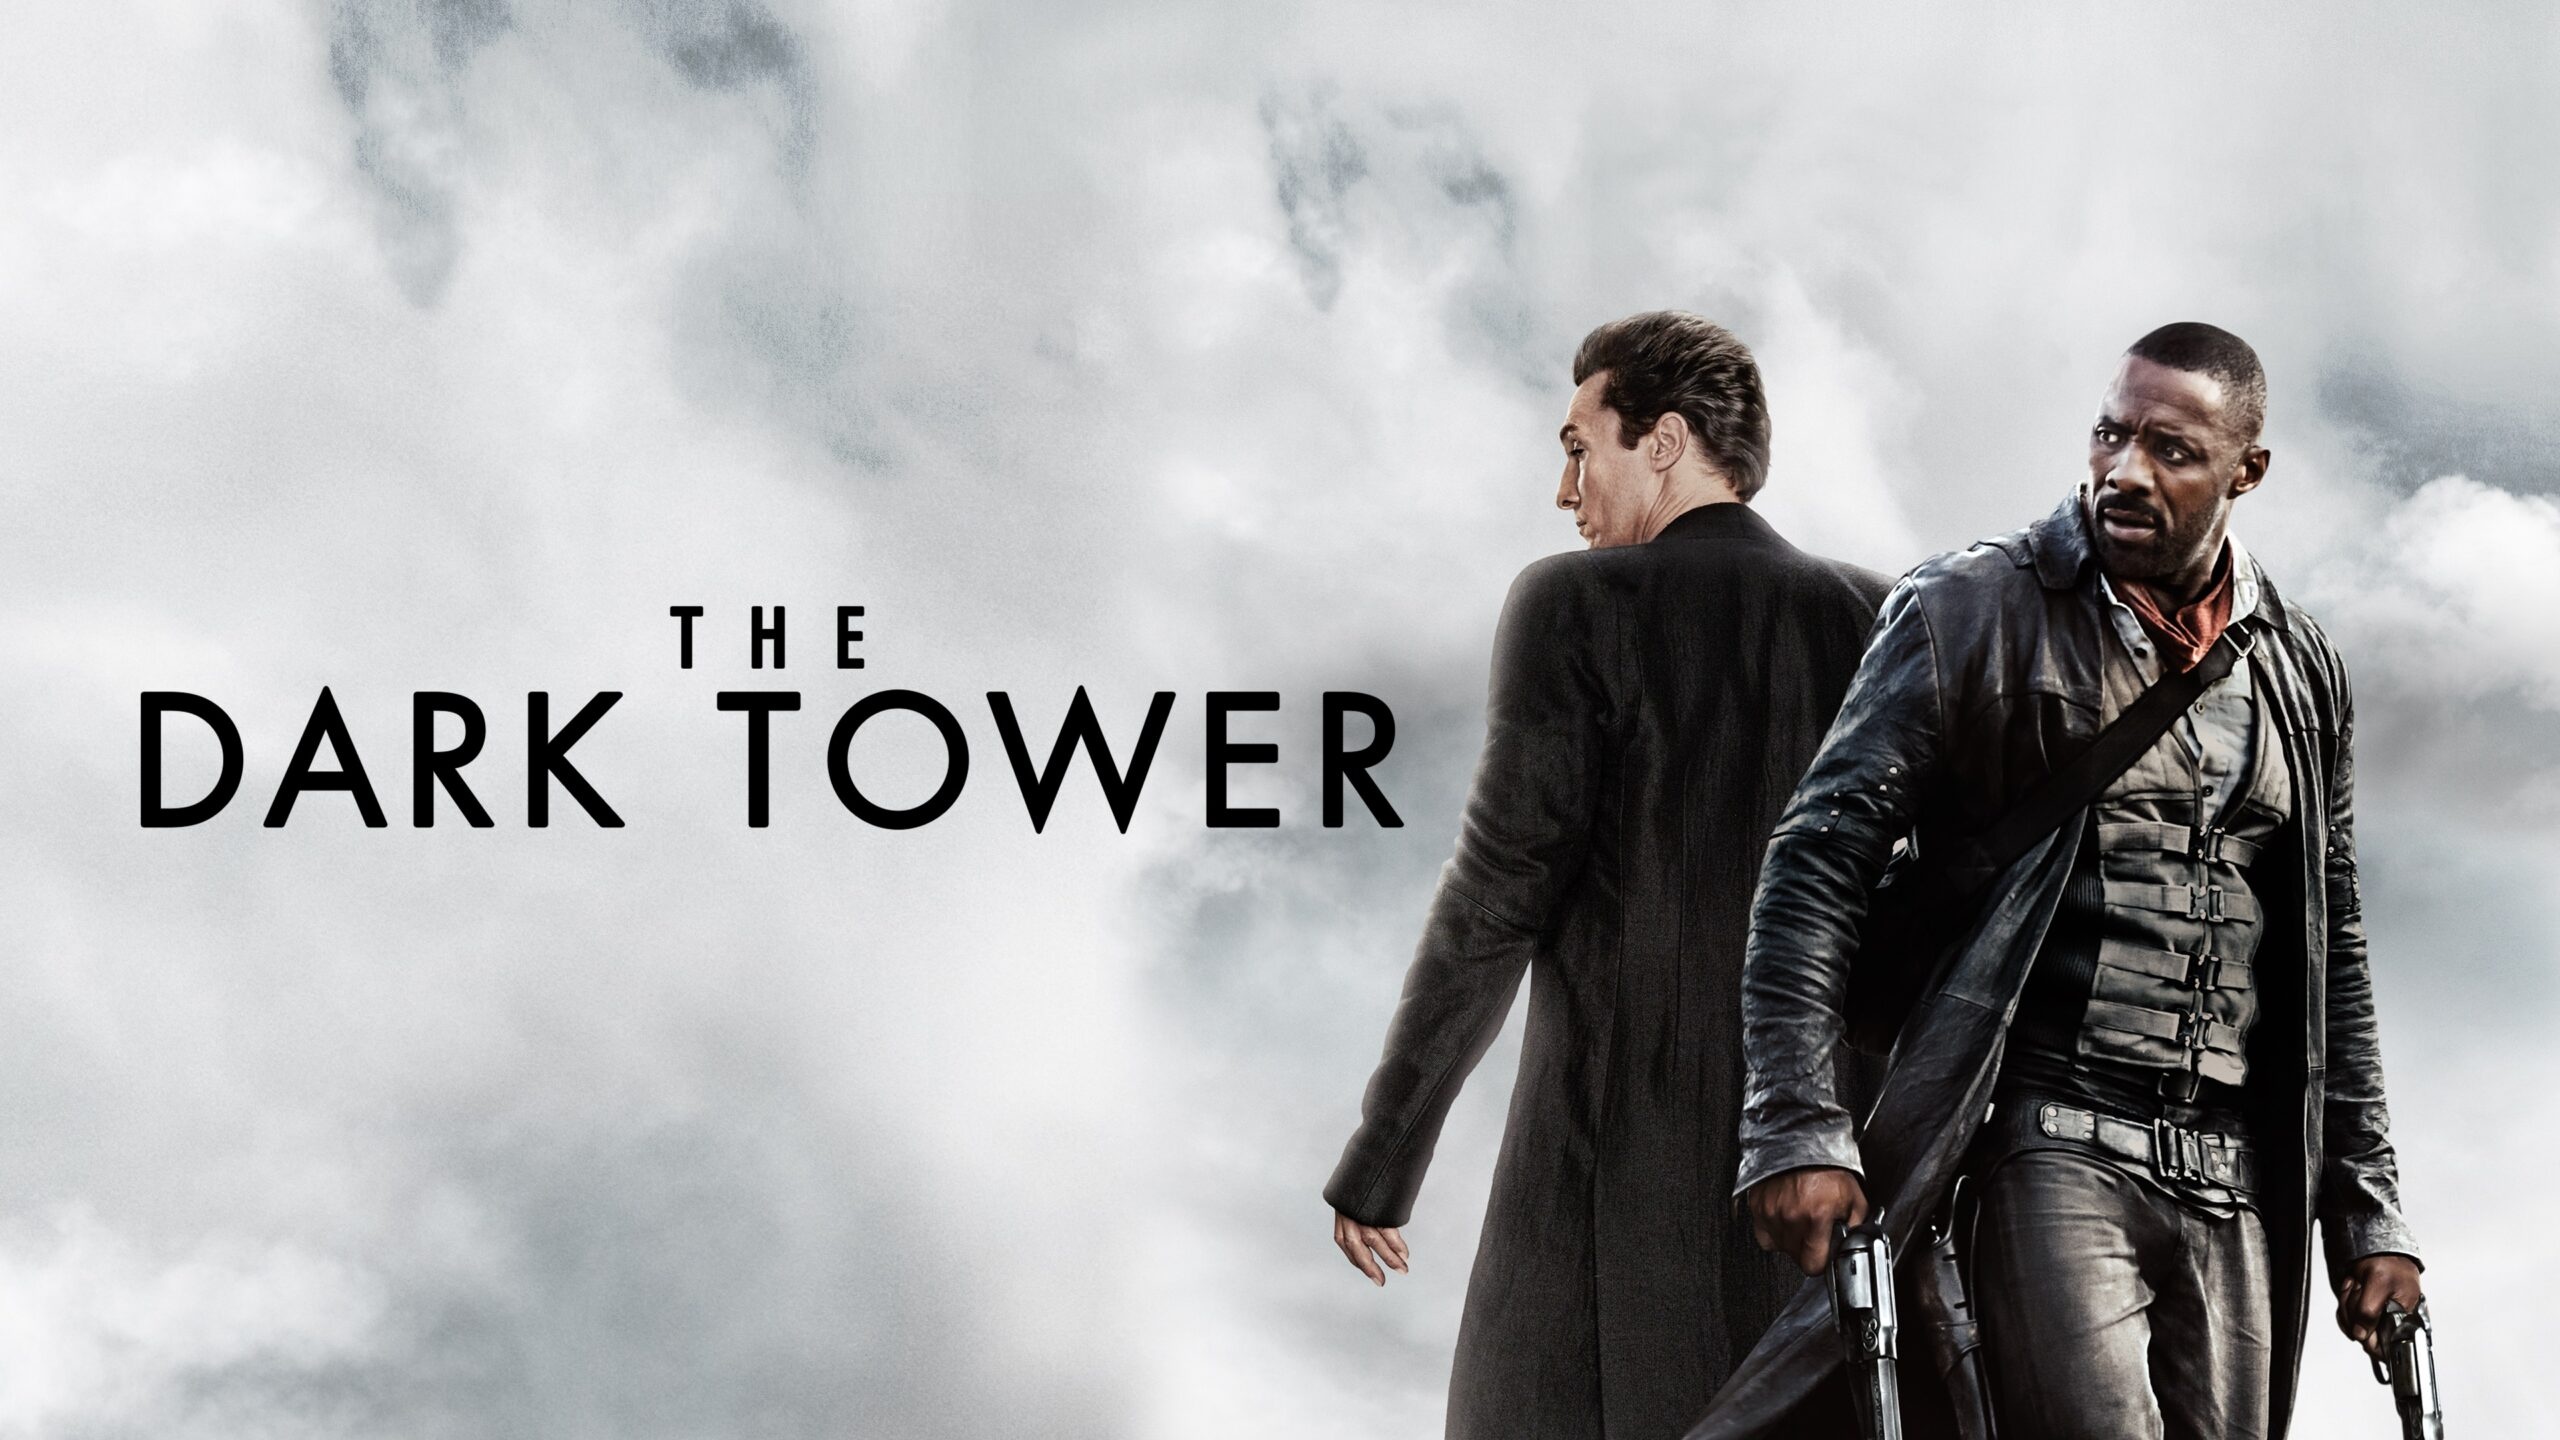 The Dark Tower 2017 review, Jumpcut Online, Action-packed film, Stephen King's universe, 2560x1440 HD Desktop